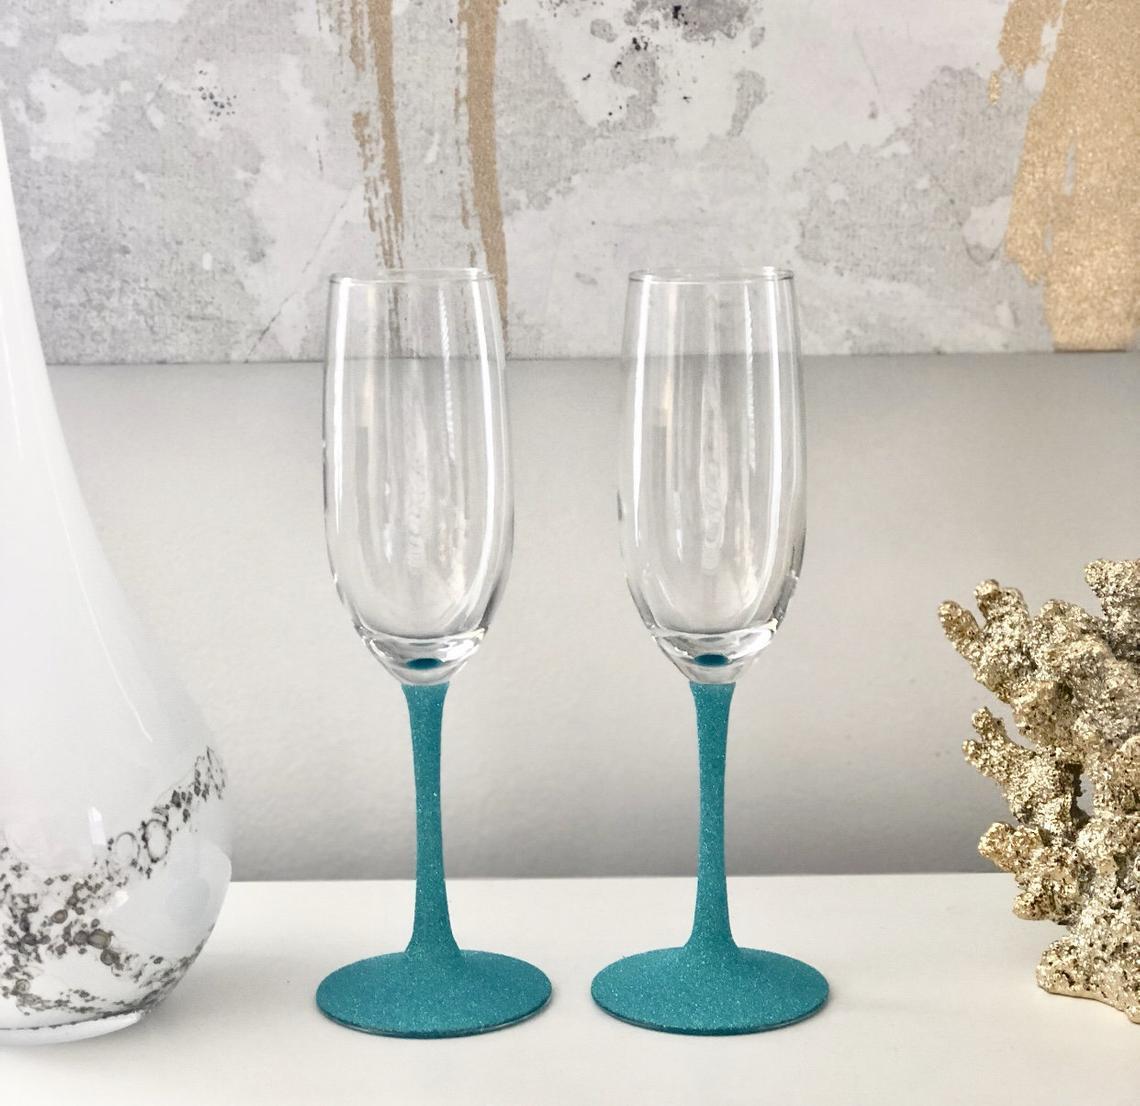 Wedding champagne glasses with colorful glittery stems